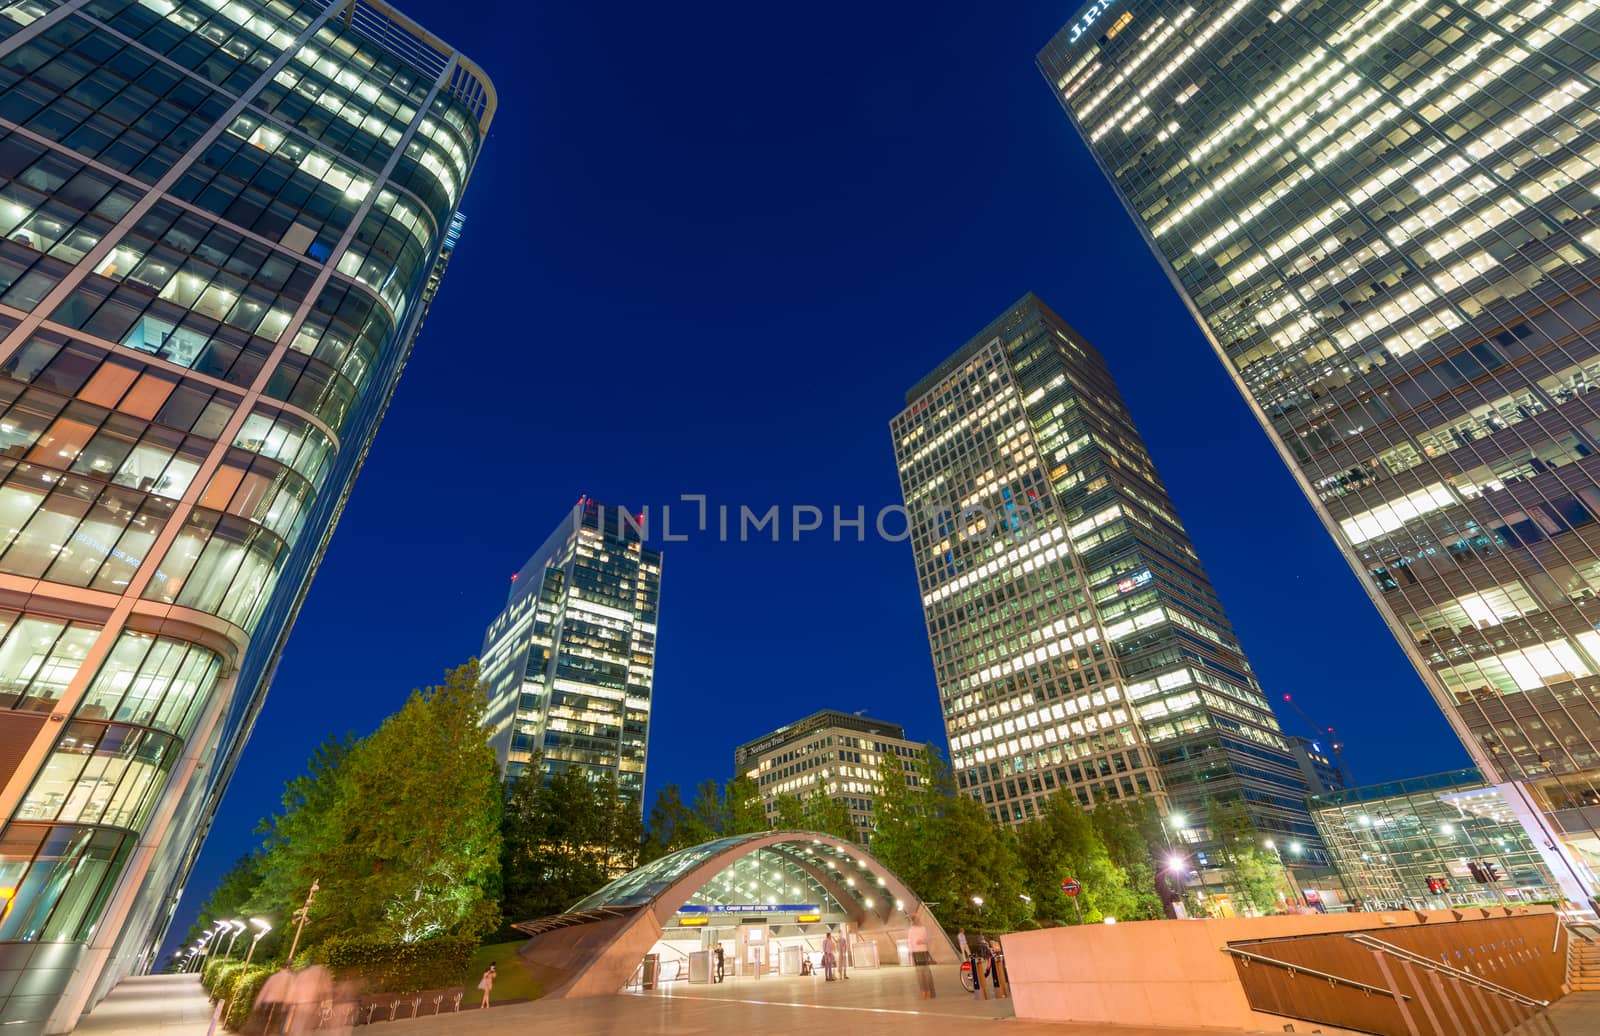 LONDON - JUNE 29, 2015: Canary Wharf skyscrapers at night. Canar by jovannig